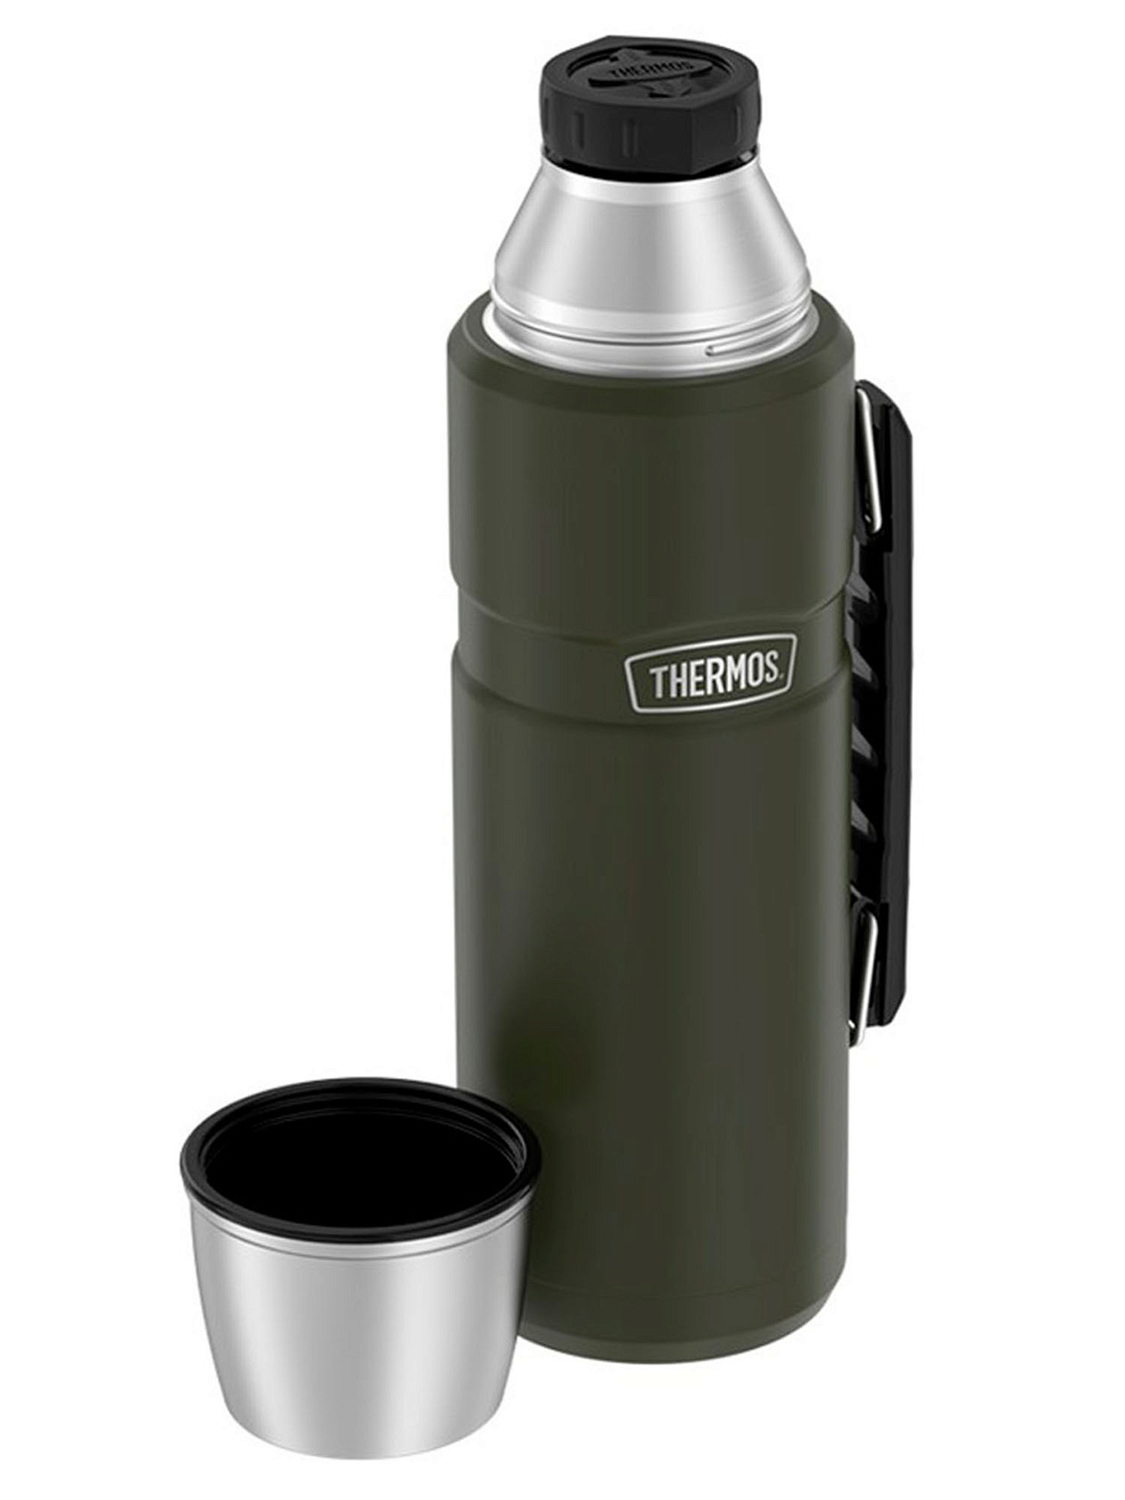 Термос Thermos SK2010 AG 1,2L Хаки